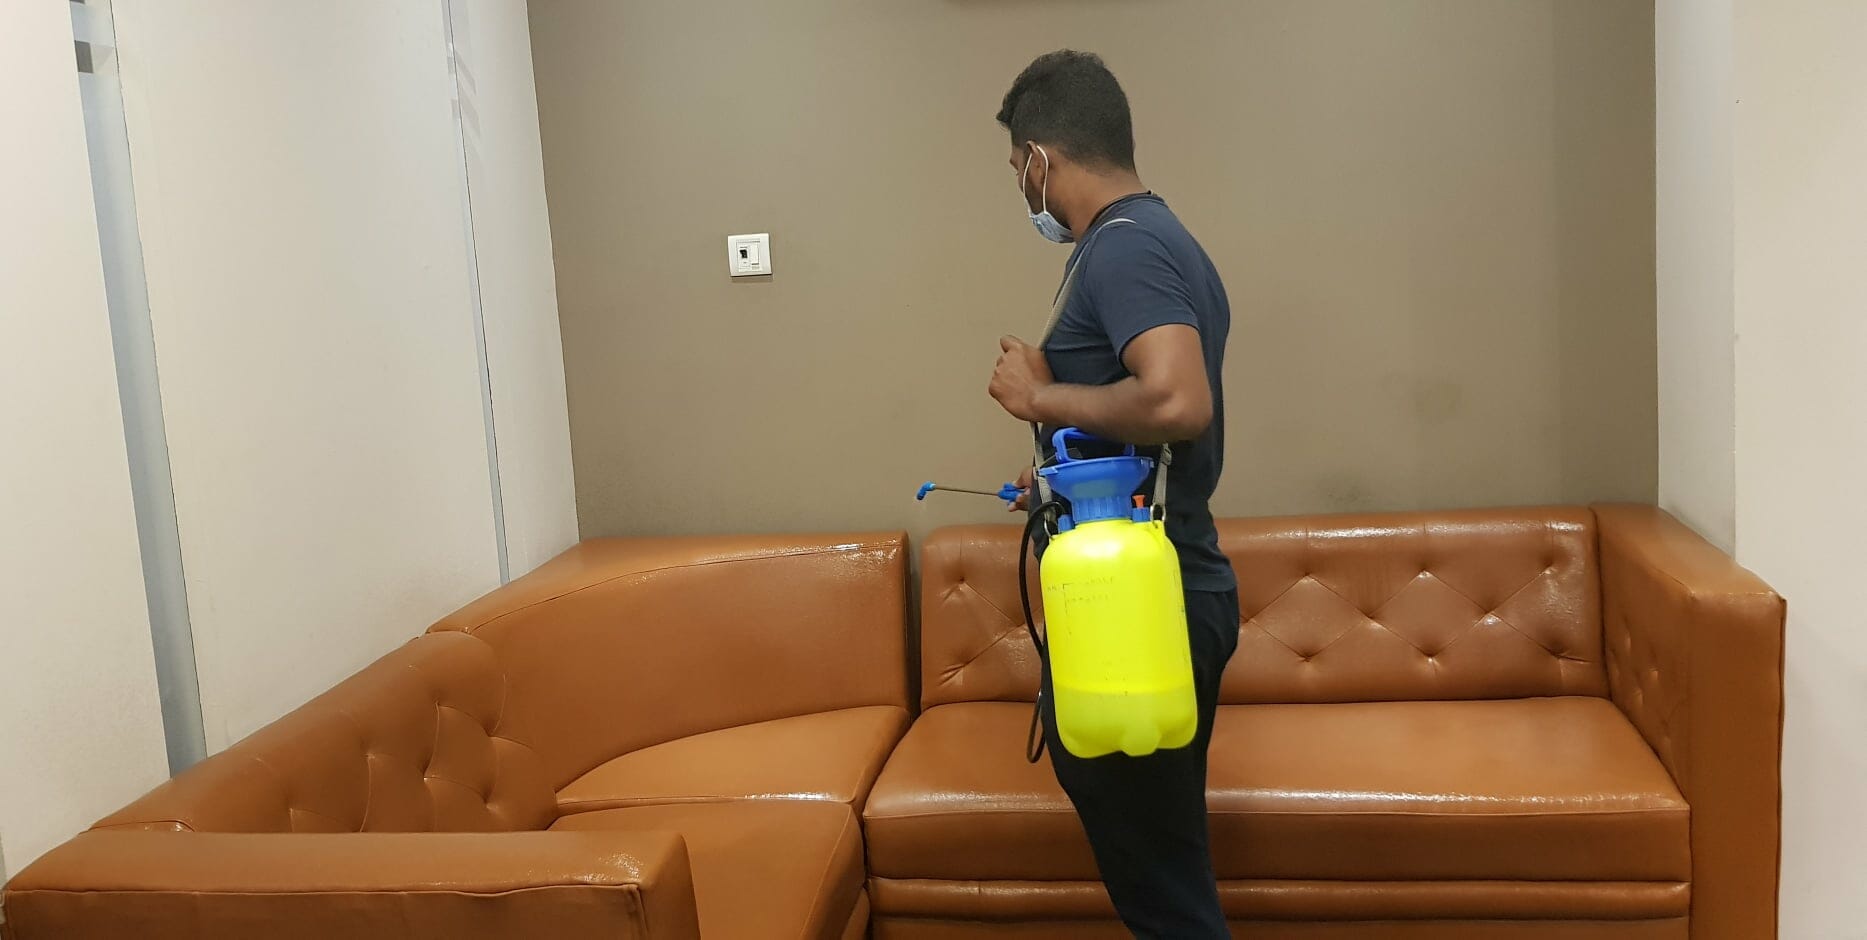 As part of a covid - 19 precautionary measure, a sanitation worker disinfects the dental clinic sofa